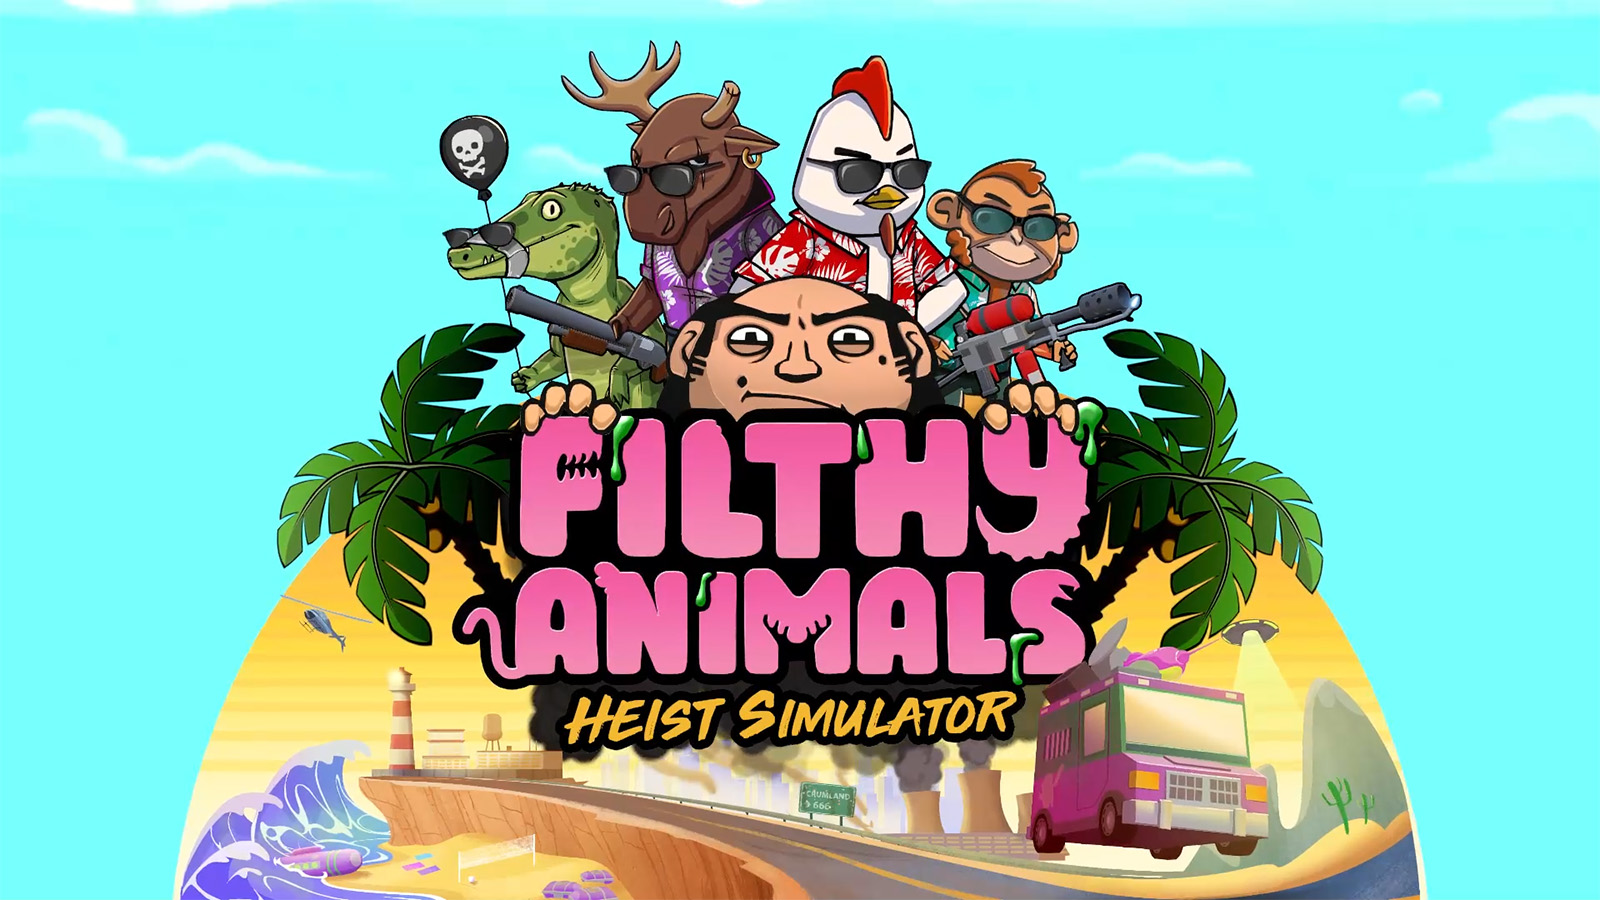 Multiplayer Heist Game Filthy Animals: Heist Simulator To Launch On PlayStation And Xbox